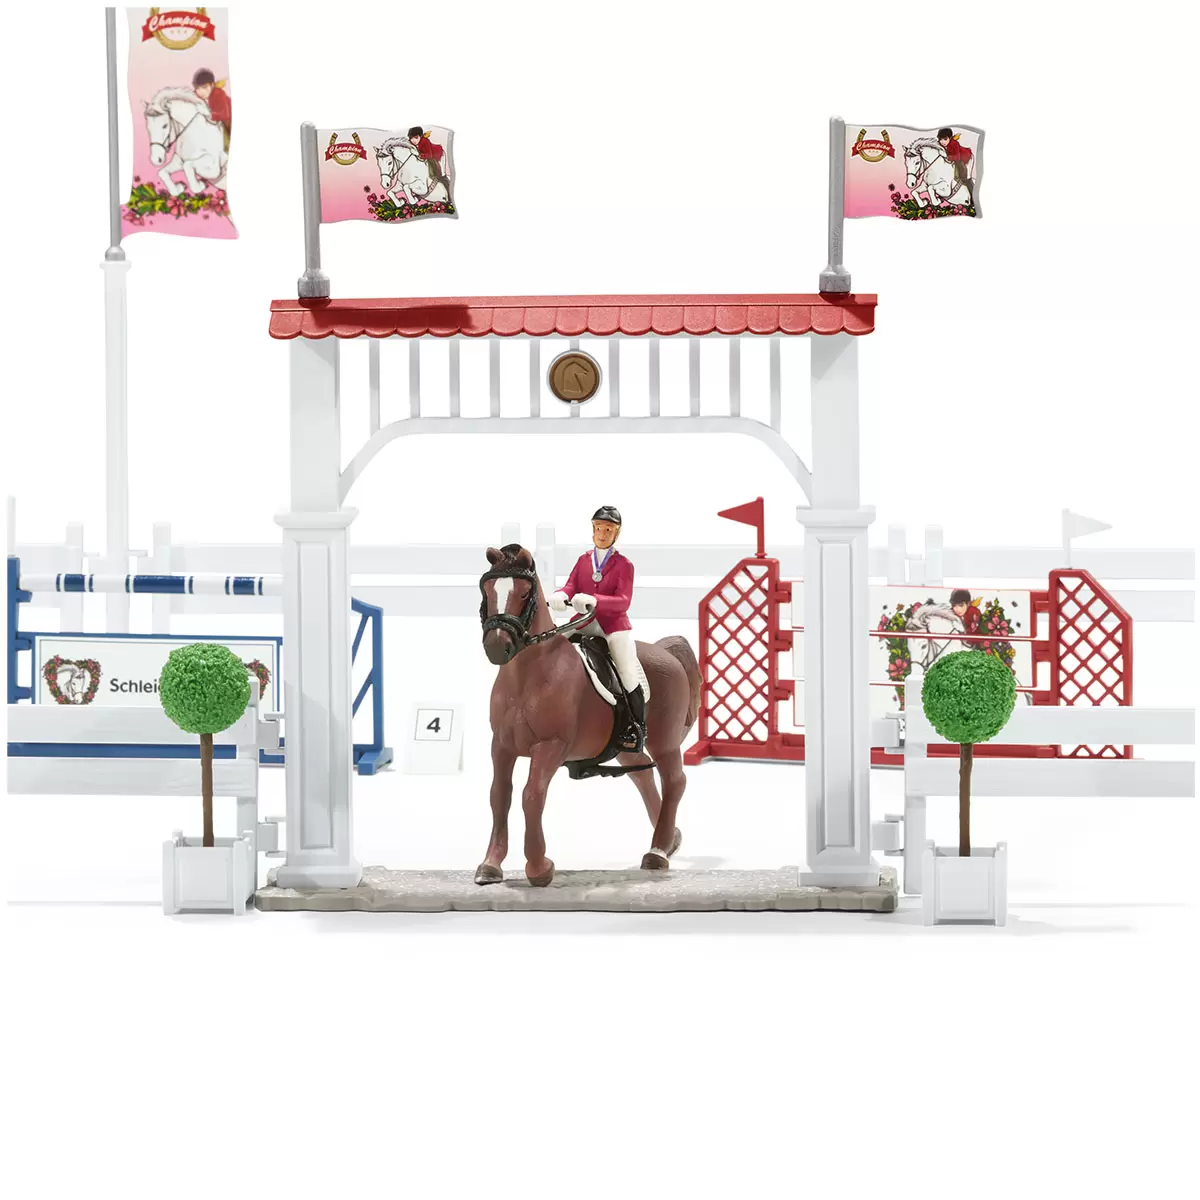 Buy Schleich Horse Club Set Box & Item Image at Costco.co.uk